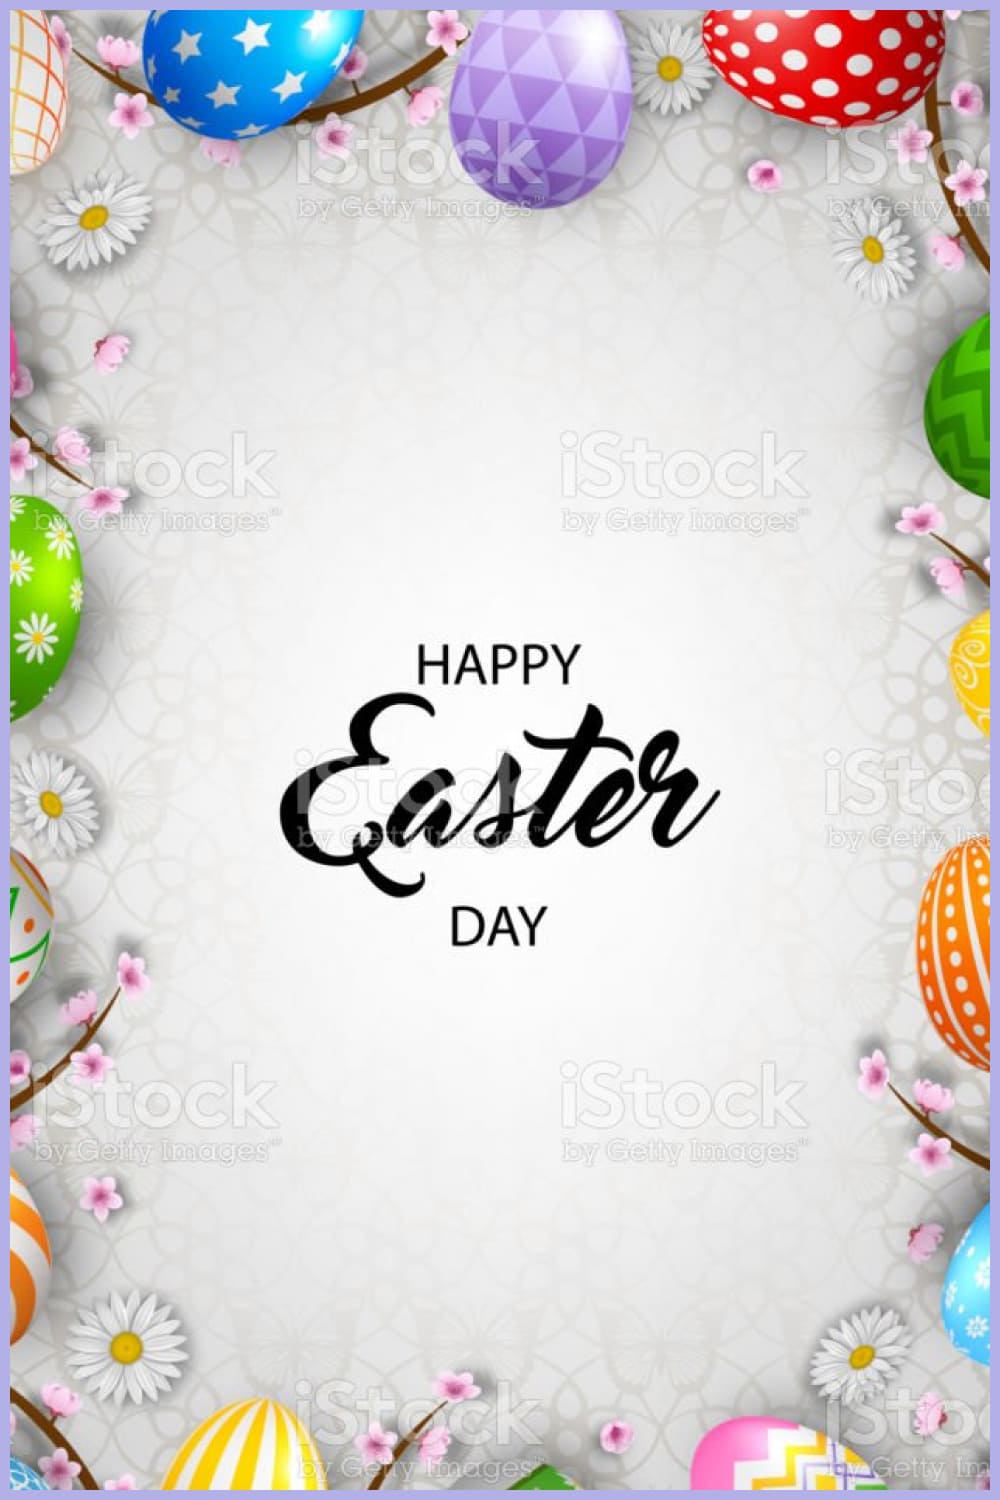 Easter background with colorful eggs and cherry flowers. easter frame with decorated eggs and branches stock illustration.